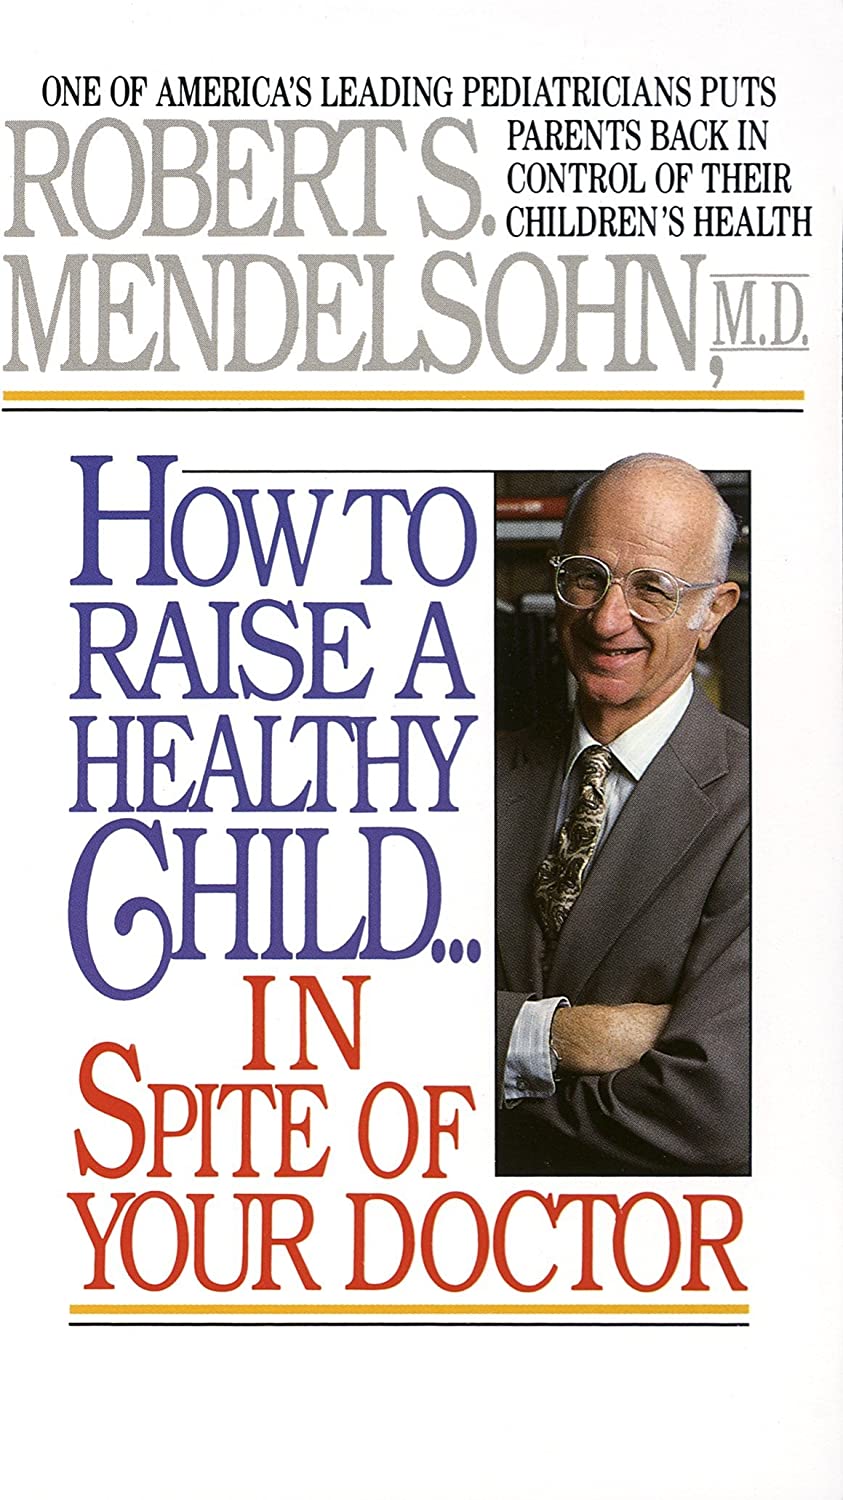 How to Raise a Healthy Child in Spite of Your Doctor: One of America’s Leading Pediatricians Puts Parents Back in Control of Their Children’s Health